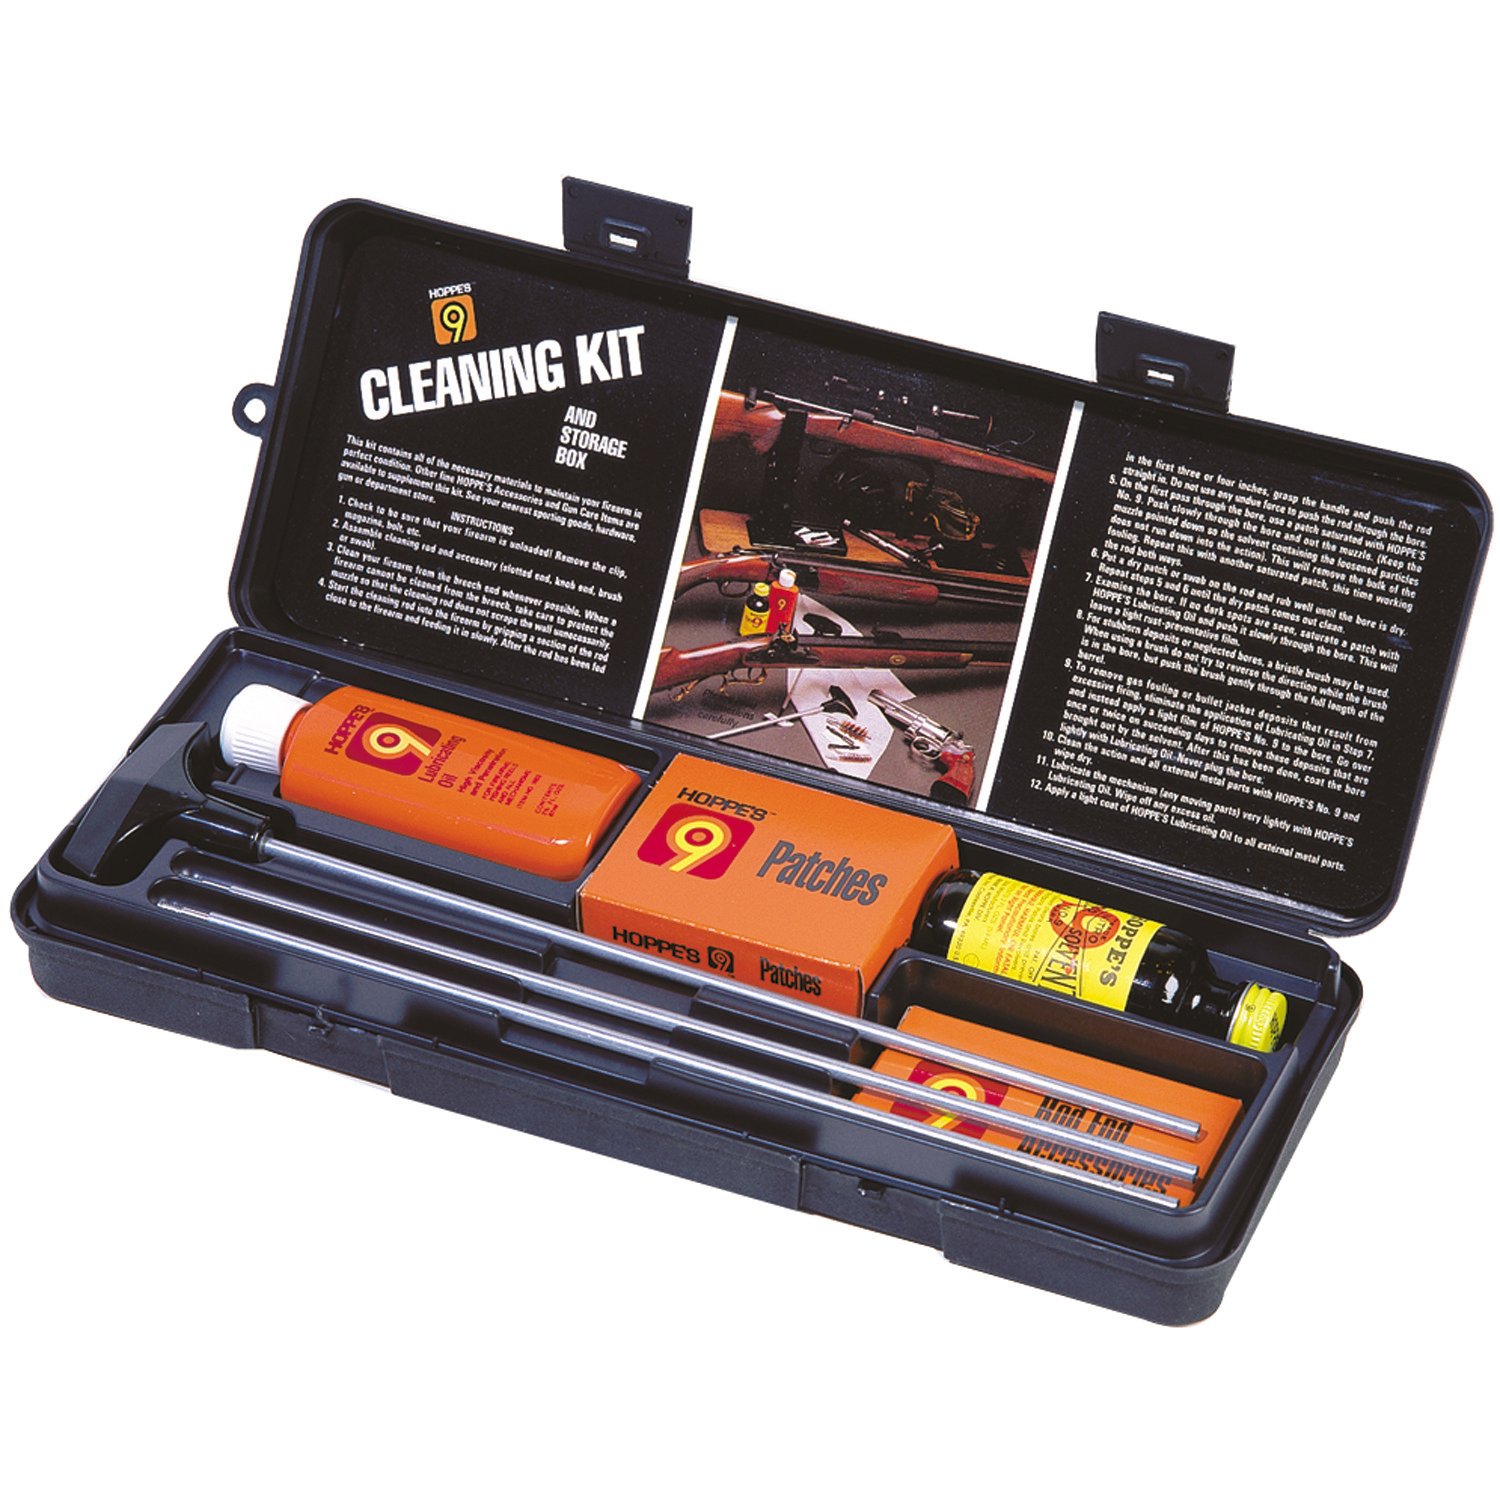 Buy Rifle & Shotgun Cleaning Kit with Aluminum Rod and More